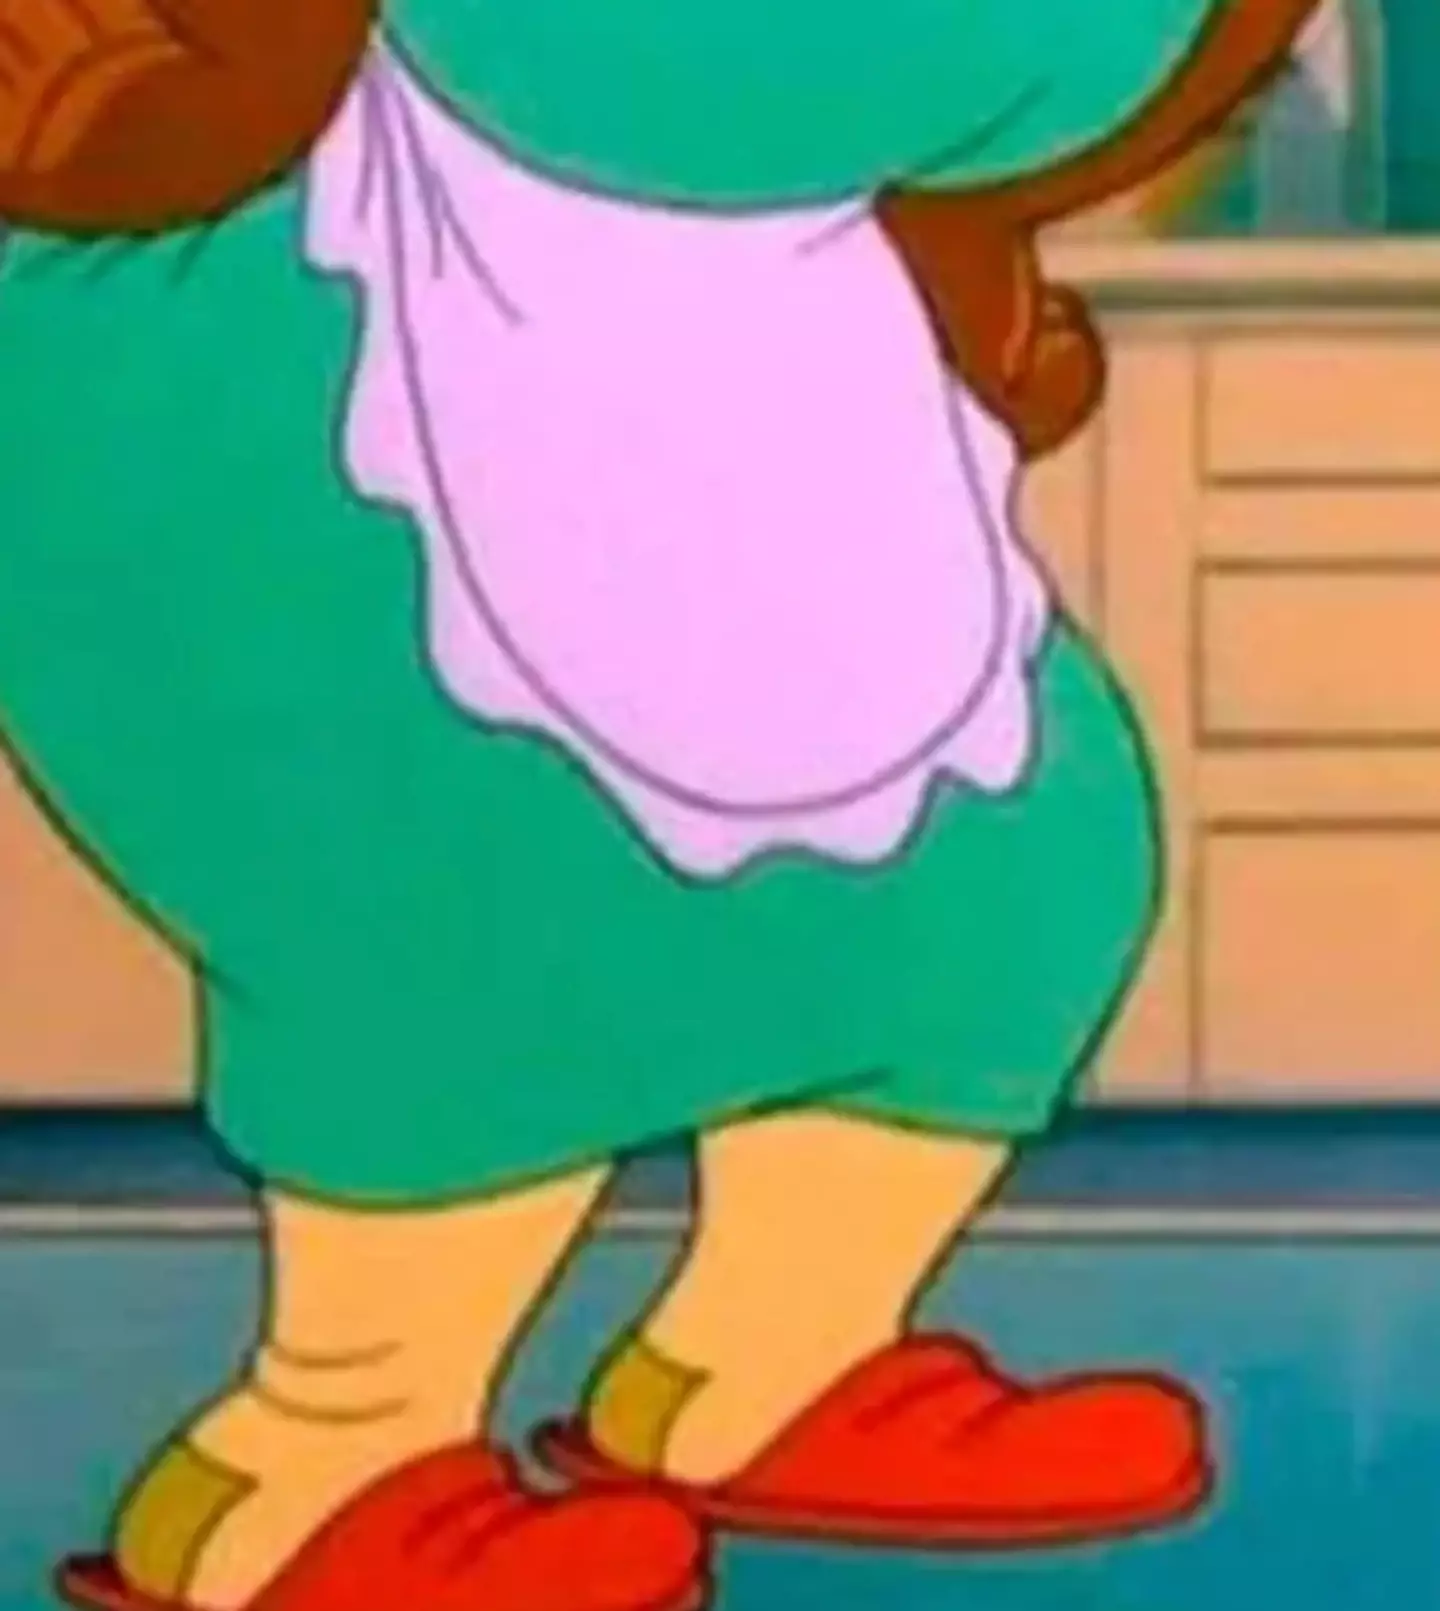 We only needed to see Mammy Two Shoes' feet to know she was angry.